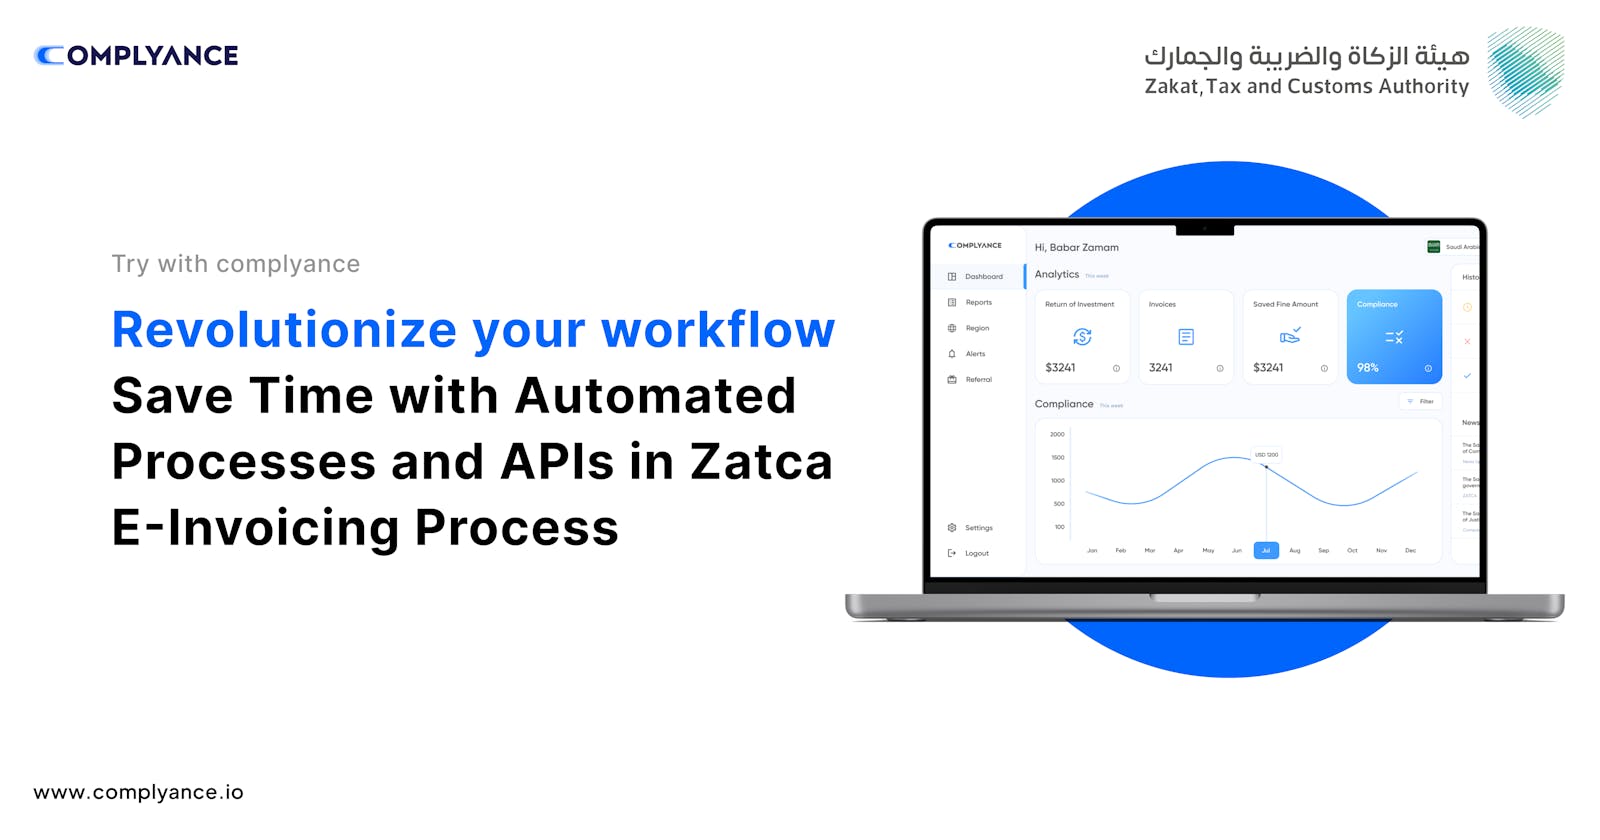 Revolutionize Your Workflow: Save Time with Automated Processes and APIs in Zatca E-Invoicing Process